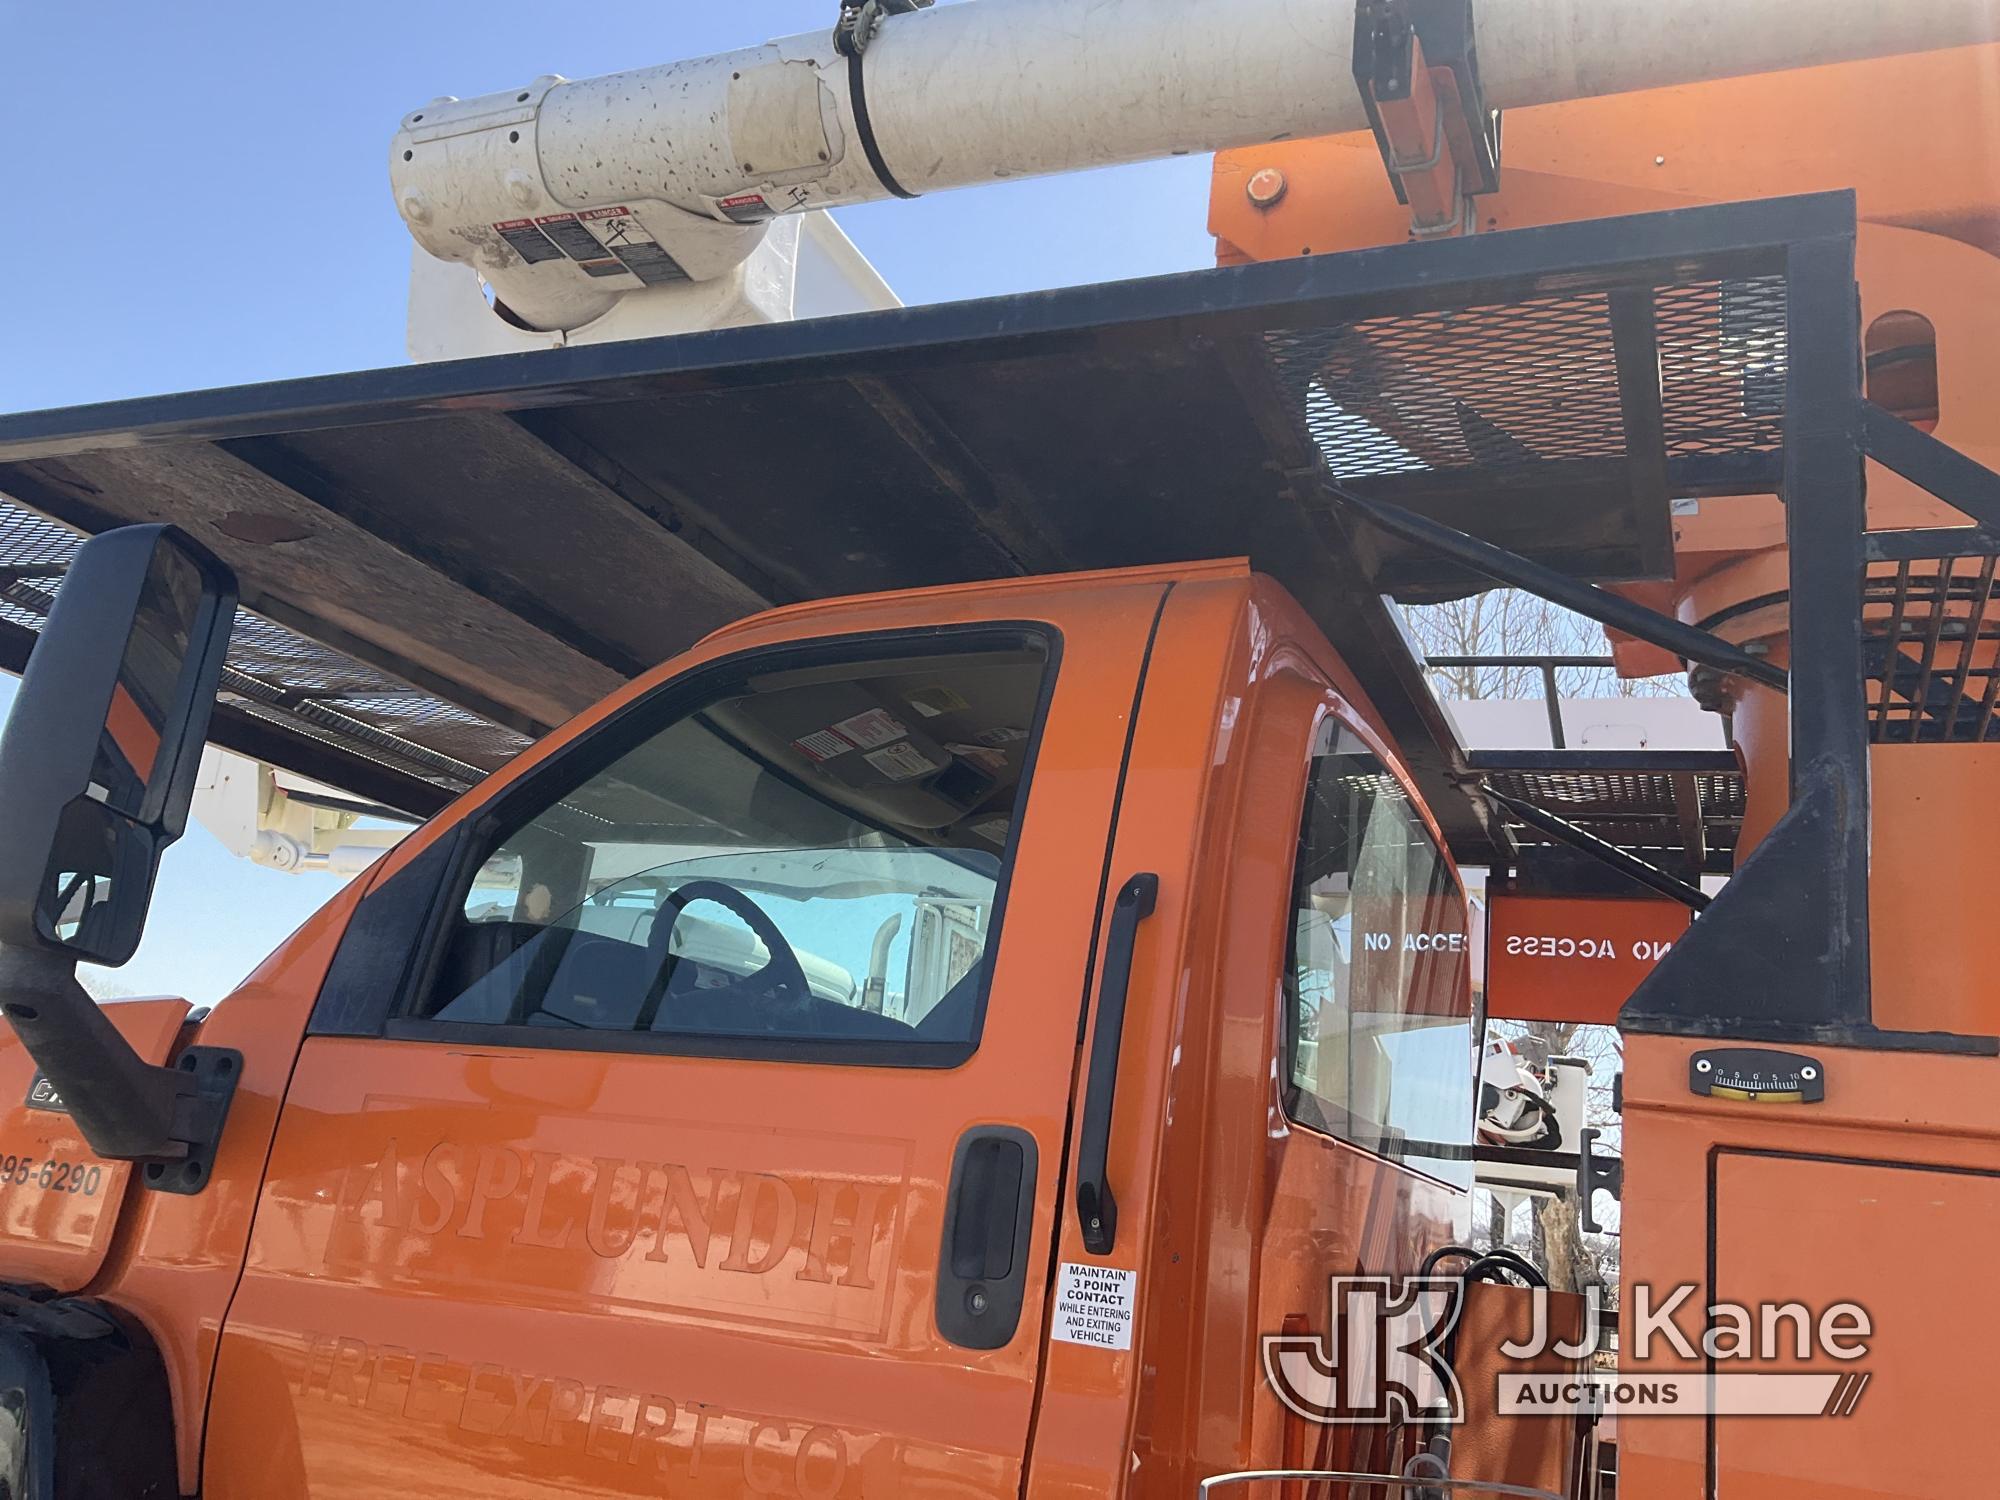 (Kansas City, MO) Altec LRV55, Over-Center Bucket Truck mounted behind cab on 2006 GMC C7500 Chipper